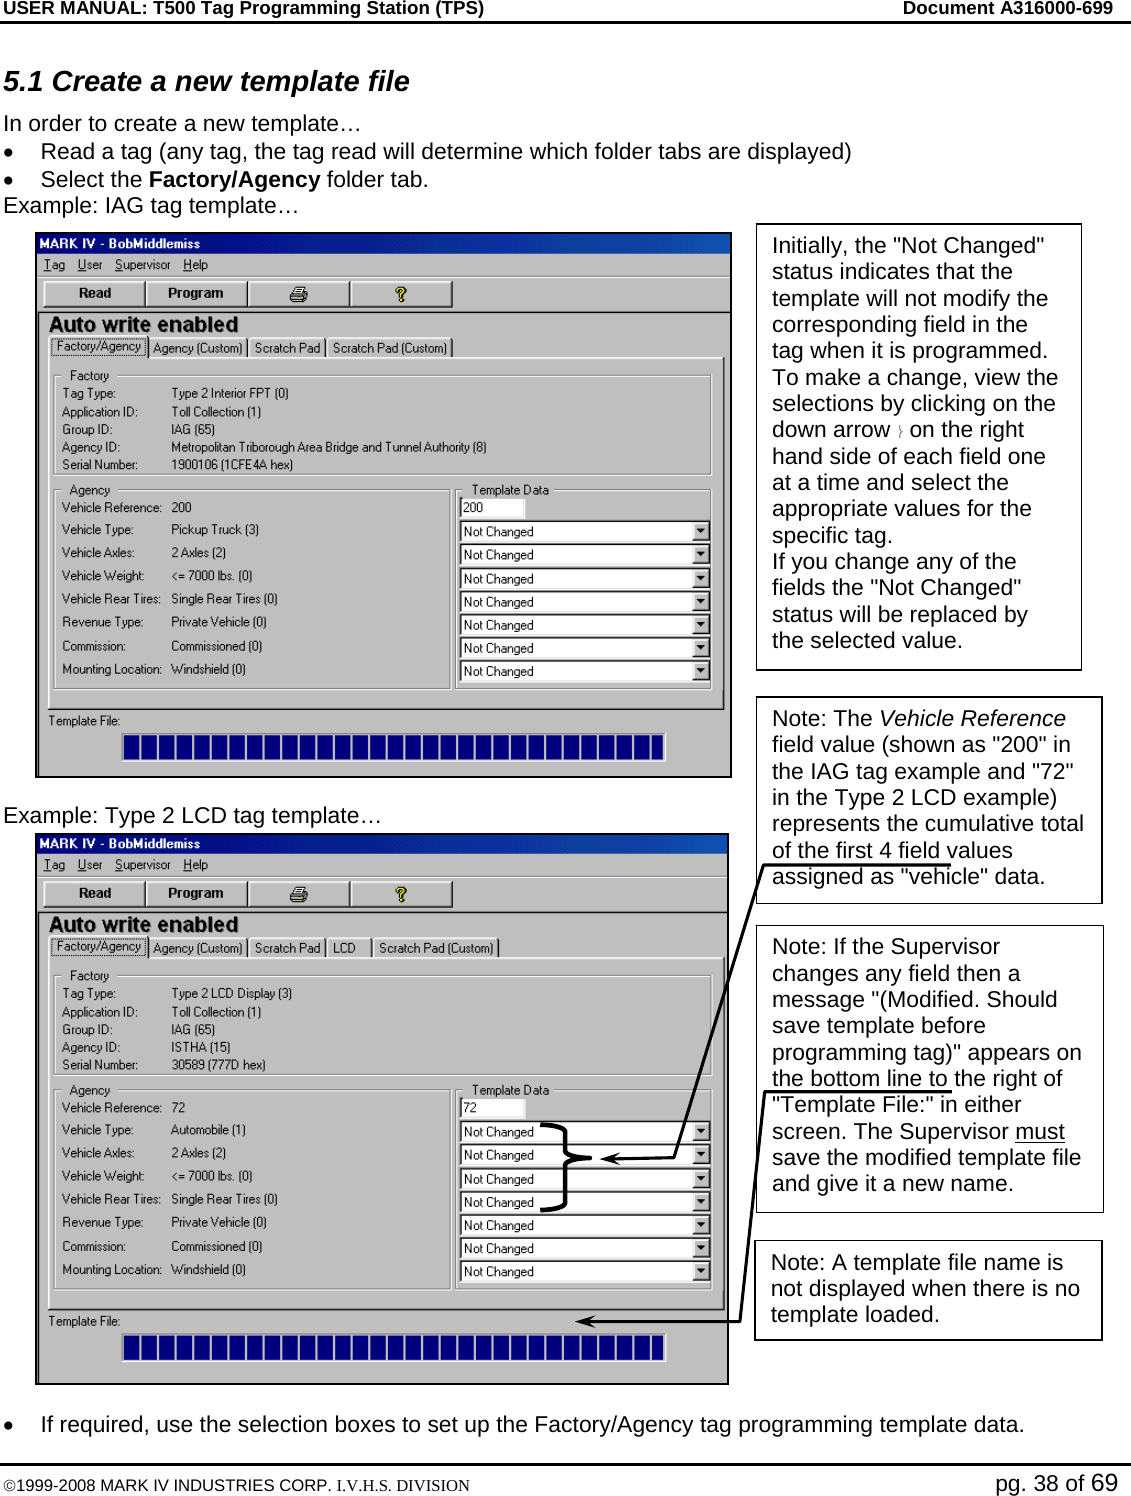 USER MANUAL: T500 Tag Programming Station (TPS)     Document A316000-699  ©1999-2008 MARK IV INDUSTRIES CORP. I.V.H.S. DIVISION   pg. 38 of 69 5.1 Create a new template file In order to create a new template… •  Read a tag (any tag, the tag read will determine which folder tabs are displayed) • Select the Factory/Agency folder tab.  Example: IAG tag template…  Example: Type 2 LCD tag template…  •  If required, use the selection boxes to set up the Factory/Agency tag programming template data. Initially, the &quot;Not Changed&quot; status indicates that the template will not modify the corresponding field in the tag when it is programmed. To make a change, view the selections by clicking on the down arrow ⎬ on the right hand side of each field one at a time and select the appropriate values for the specific tag.  If you change any of the fields the &quot;Not Changed&quot; status will be replaced by the selected value. Note: The Vehicle Reference field value (shown as &quot;200&quot; in the IAG tag example and &quot;72&quot; in the Type 2 LCD example) represents the cumulative total of the first 4 field values assigned as &quot;vehicle&quot; data. Note: If the Supervisor changes any field then a message &quot;(Modified. Should save template before programming tag)&quot; appears on the bottom line to the right of &quot;Template File:&quot; in either screen. The Supervisor must save the modified template file and give it a new name. Note: A template file name is not displayed when there is no template loaded. 